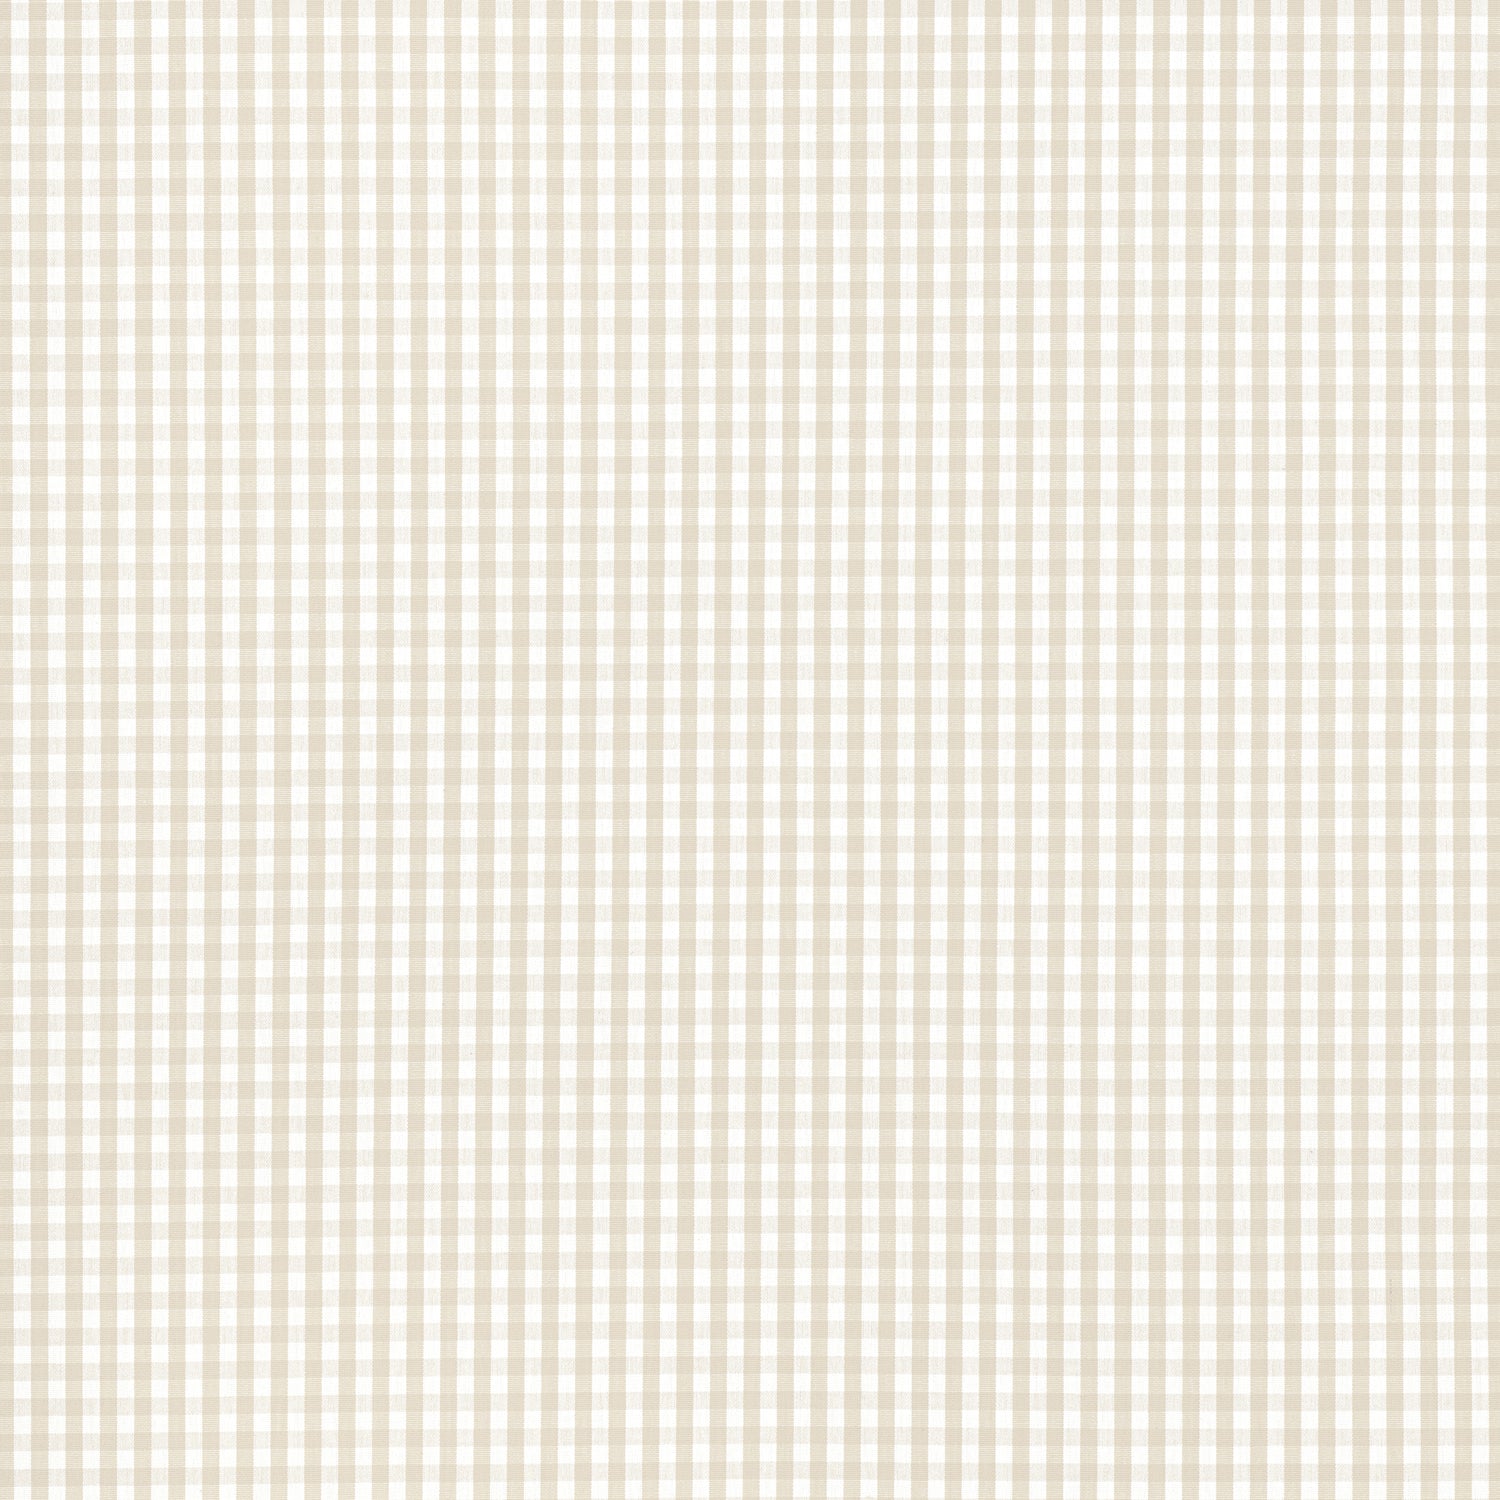 Leighton Check fabric in Beige color - pattern number AW24509 - by Anna French in the Devon collection